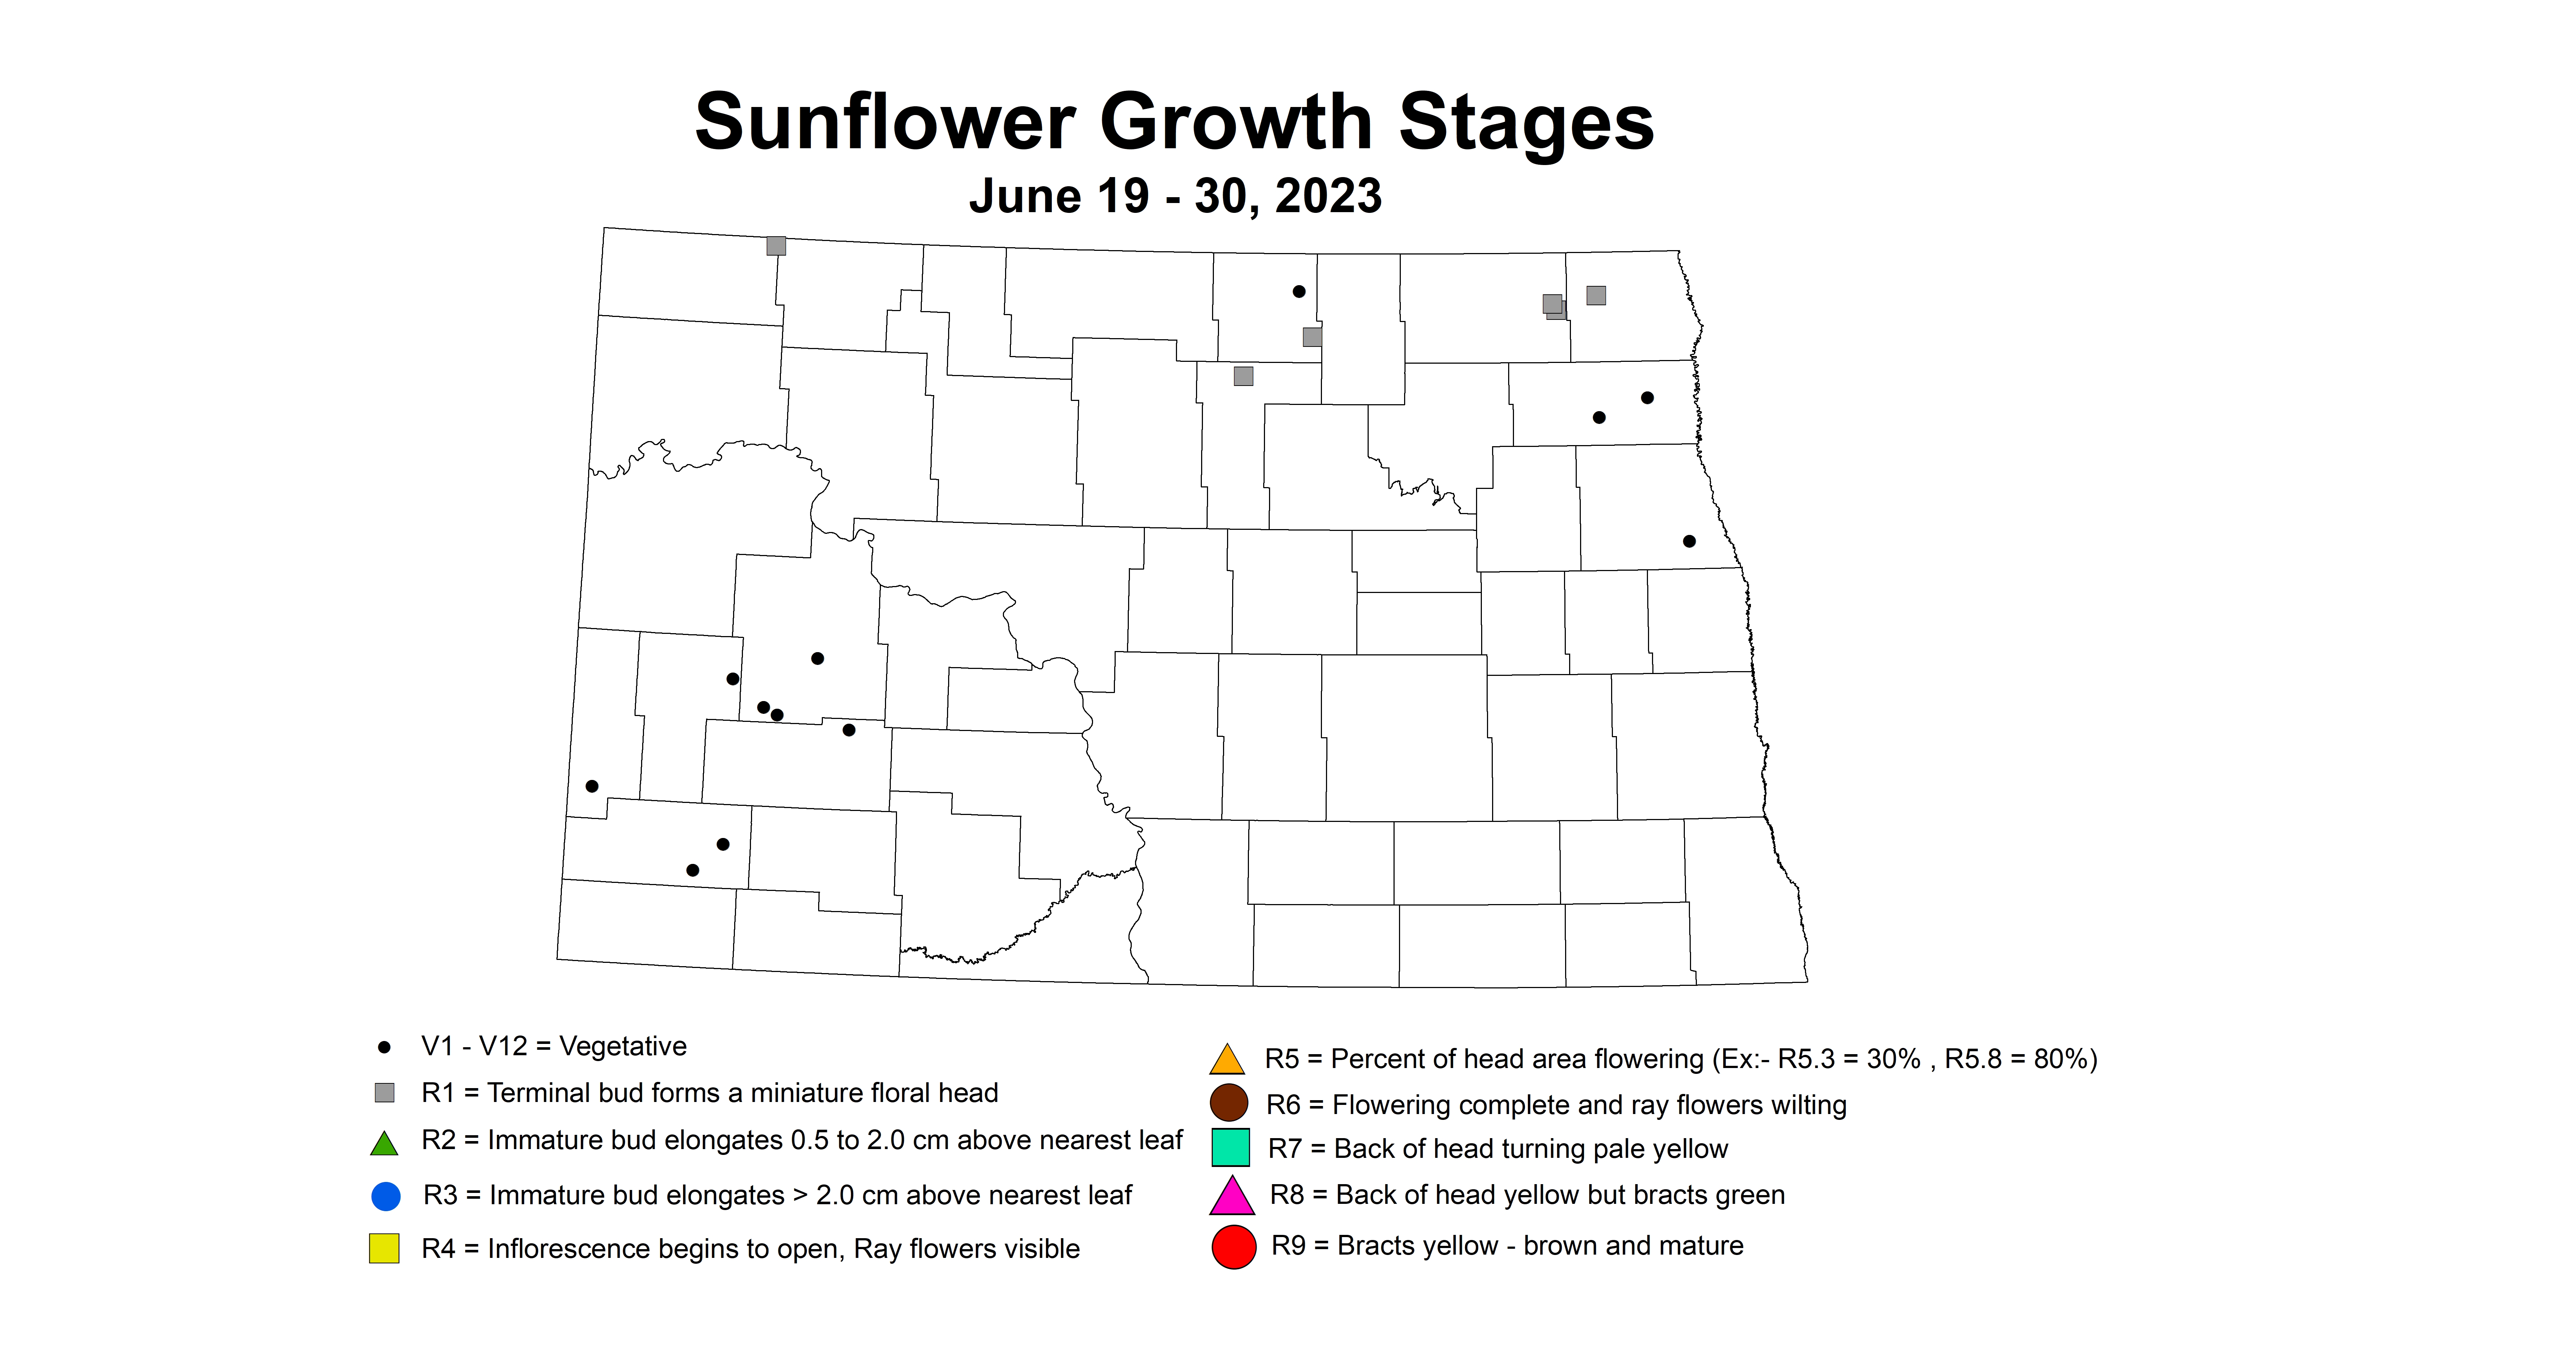 sunflower growth stages June 19-30 2023